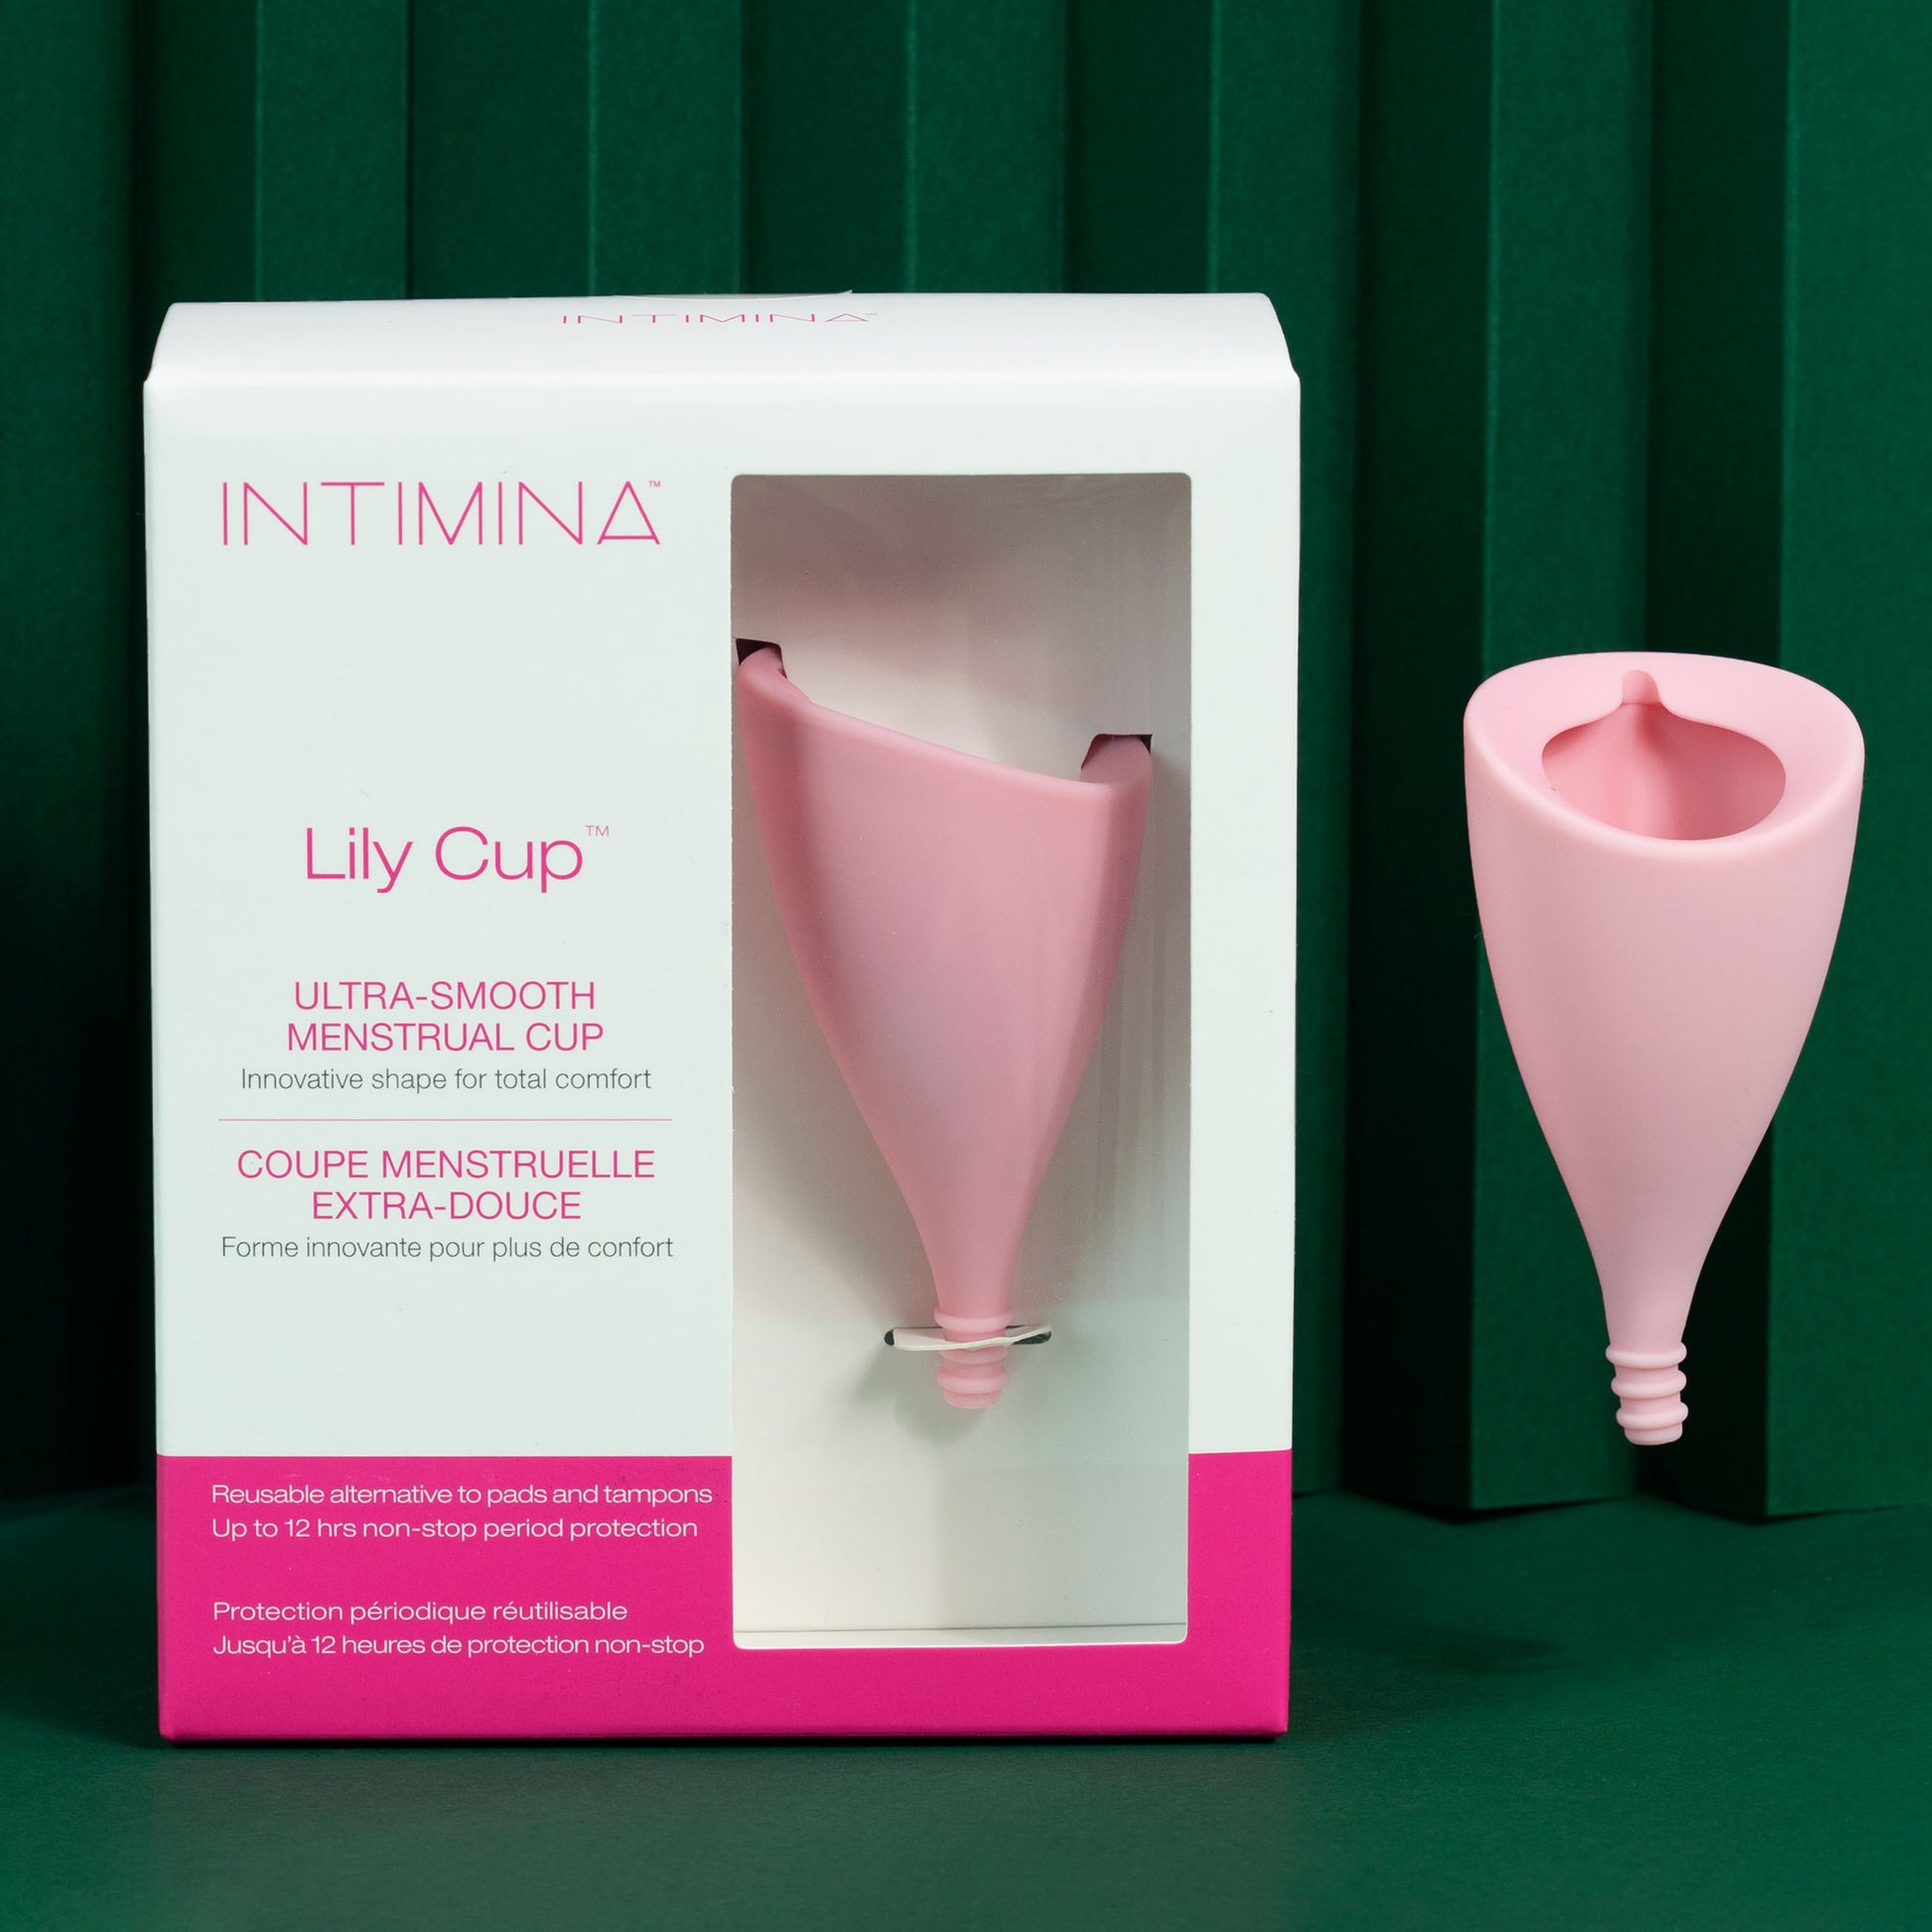 Intimina Lily Cup Size A